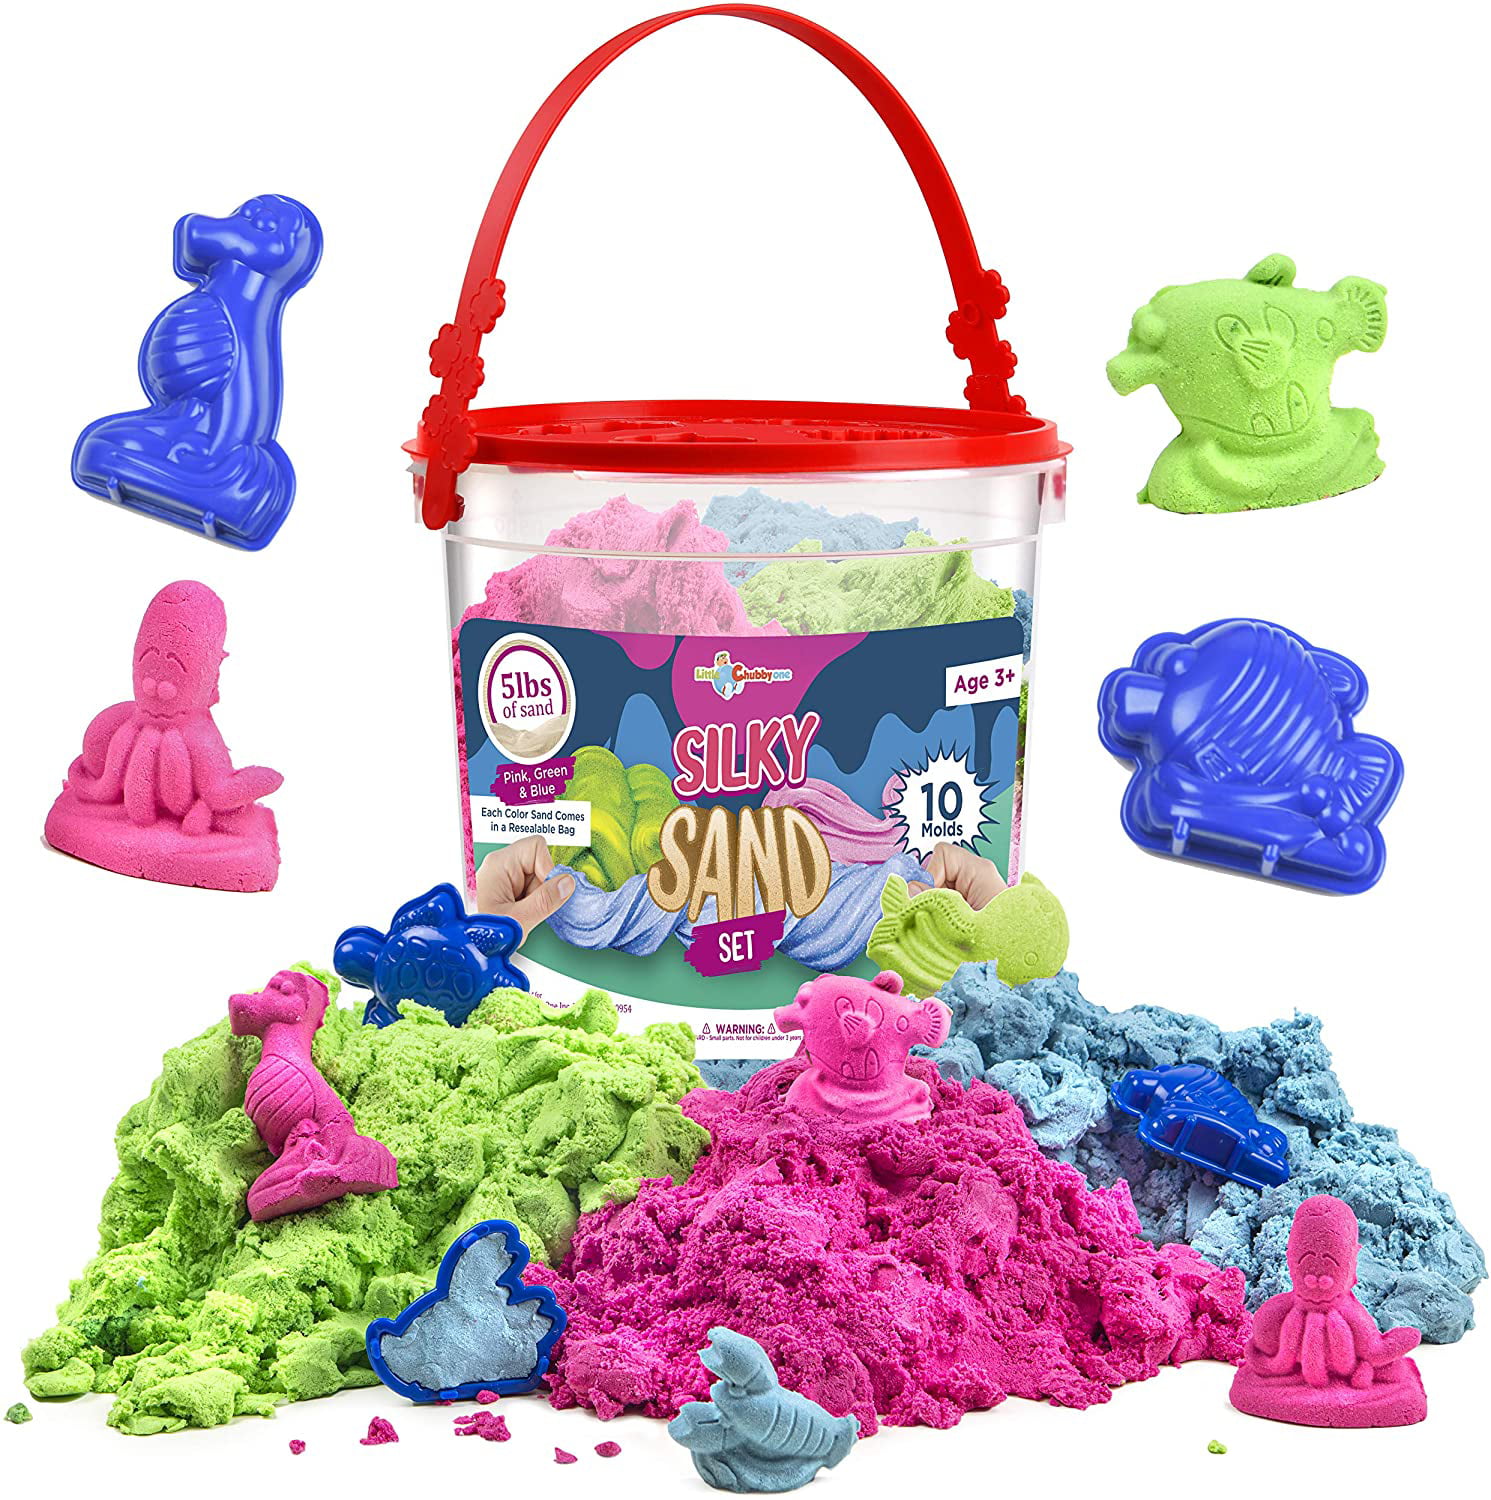 Play Set with Molds Helps Develop Creativity and Motor Skills Mess Free Play Comes in for Boys and Girls Natural LITTLE CHUBBY ONE 2 Lb Play Sand Magic Sand Set 